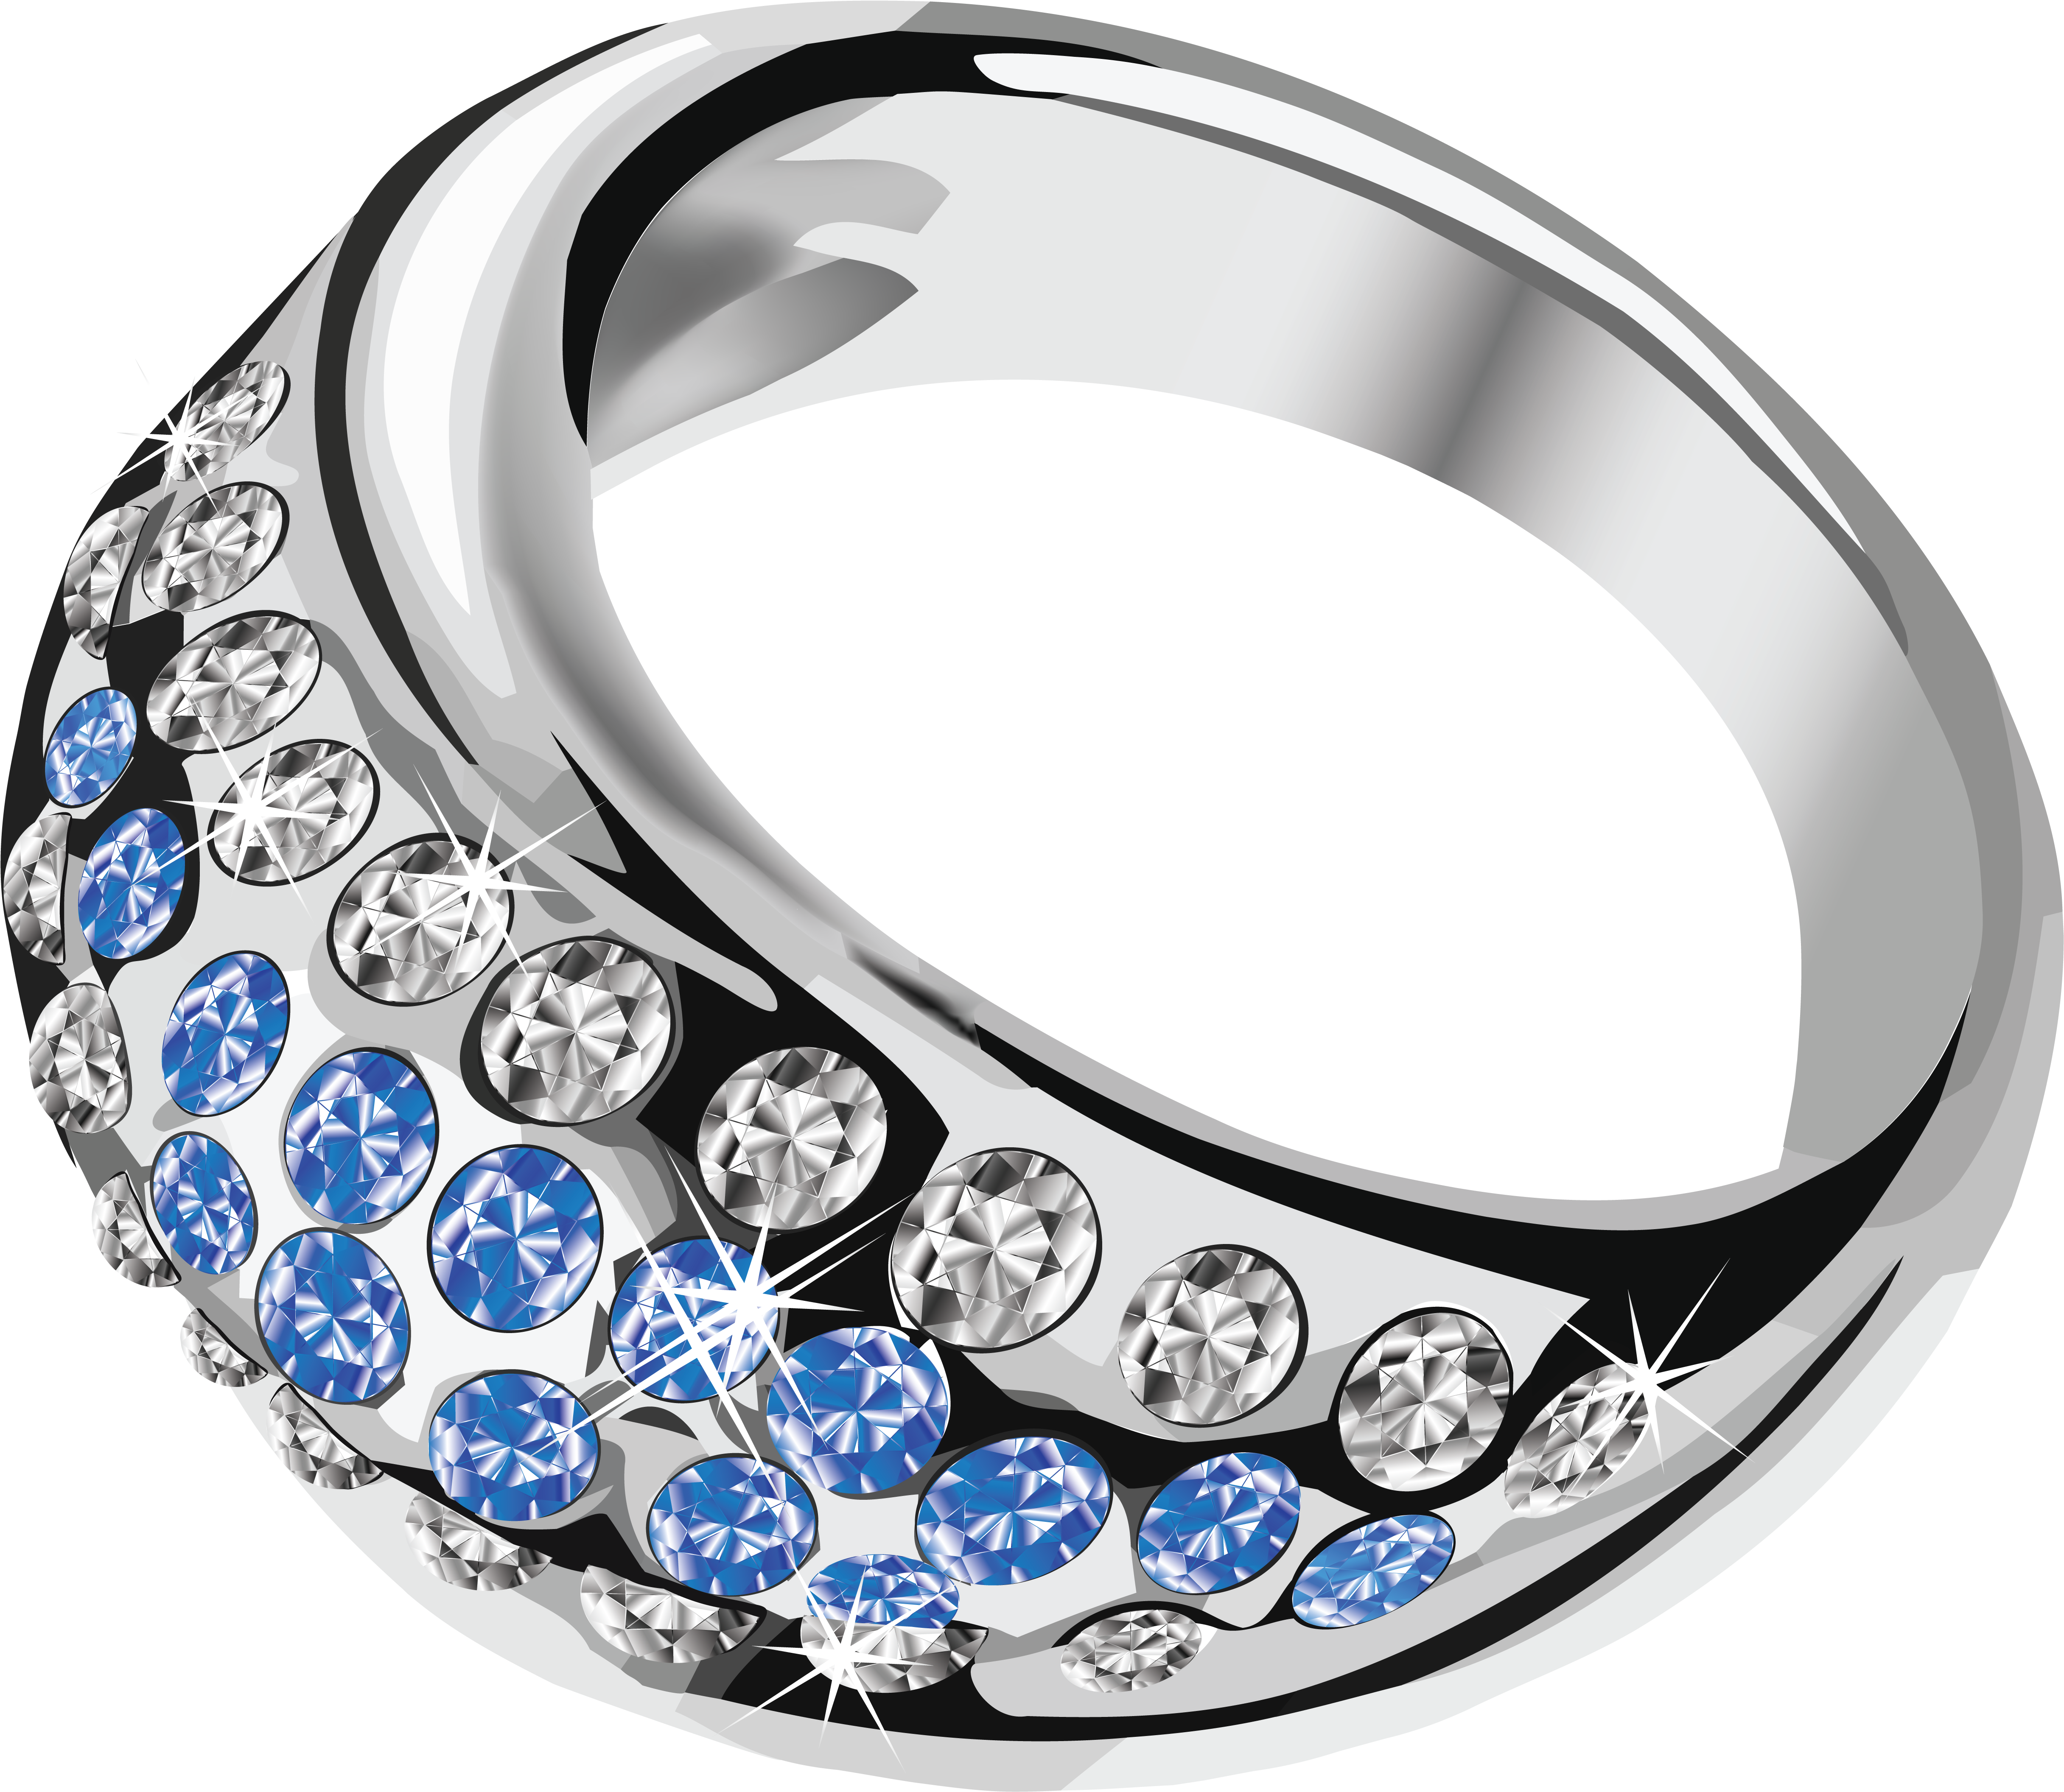 A Silver Ring With Blue And White Stones